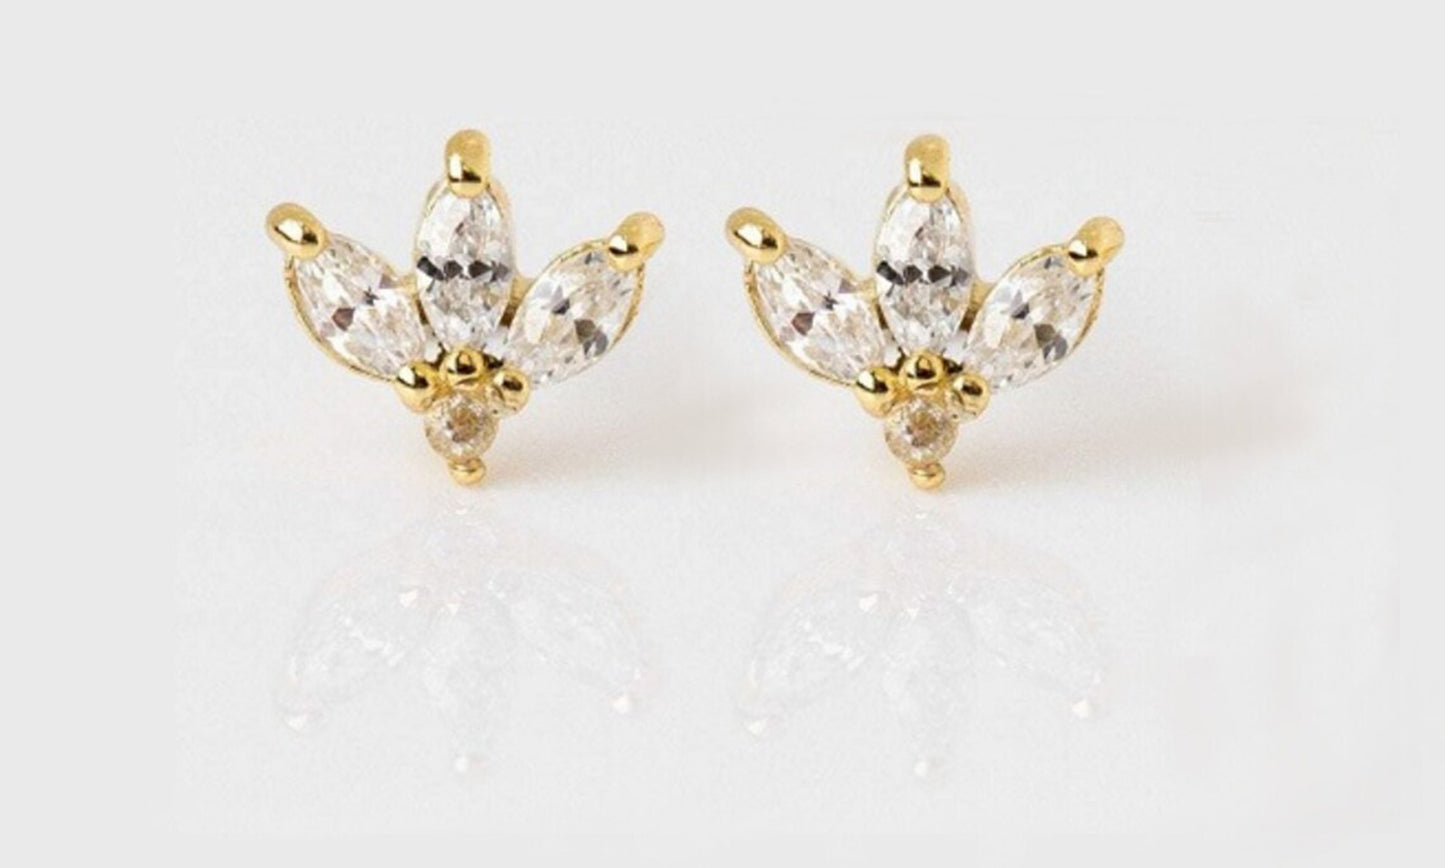 Close up view of a pair of diamond stud earrings with a marquise cut shape set in a gold setting on a white blank surface.